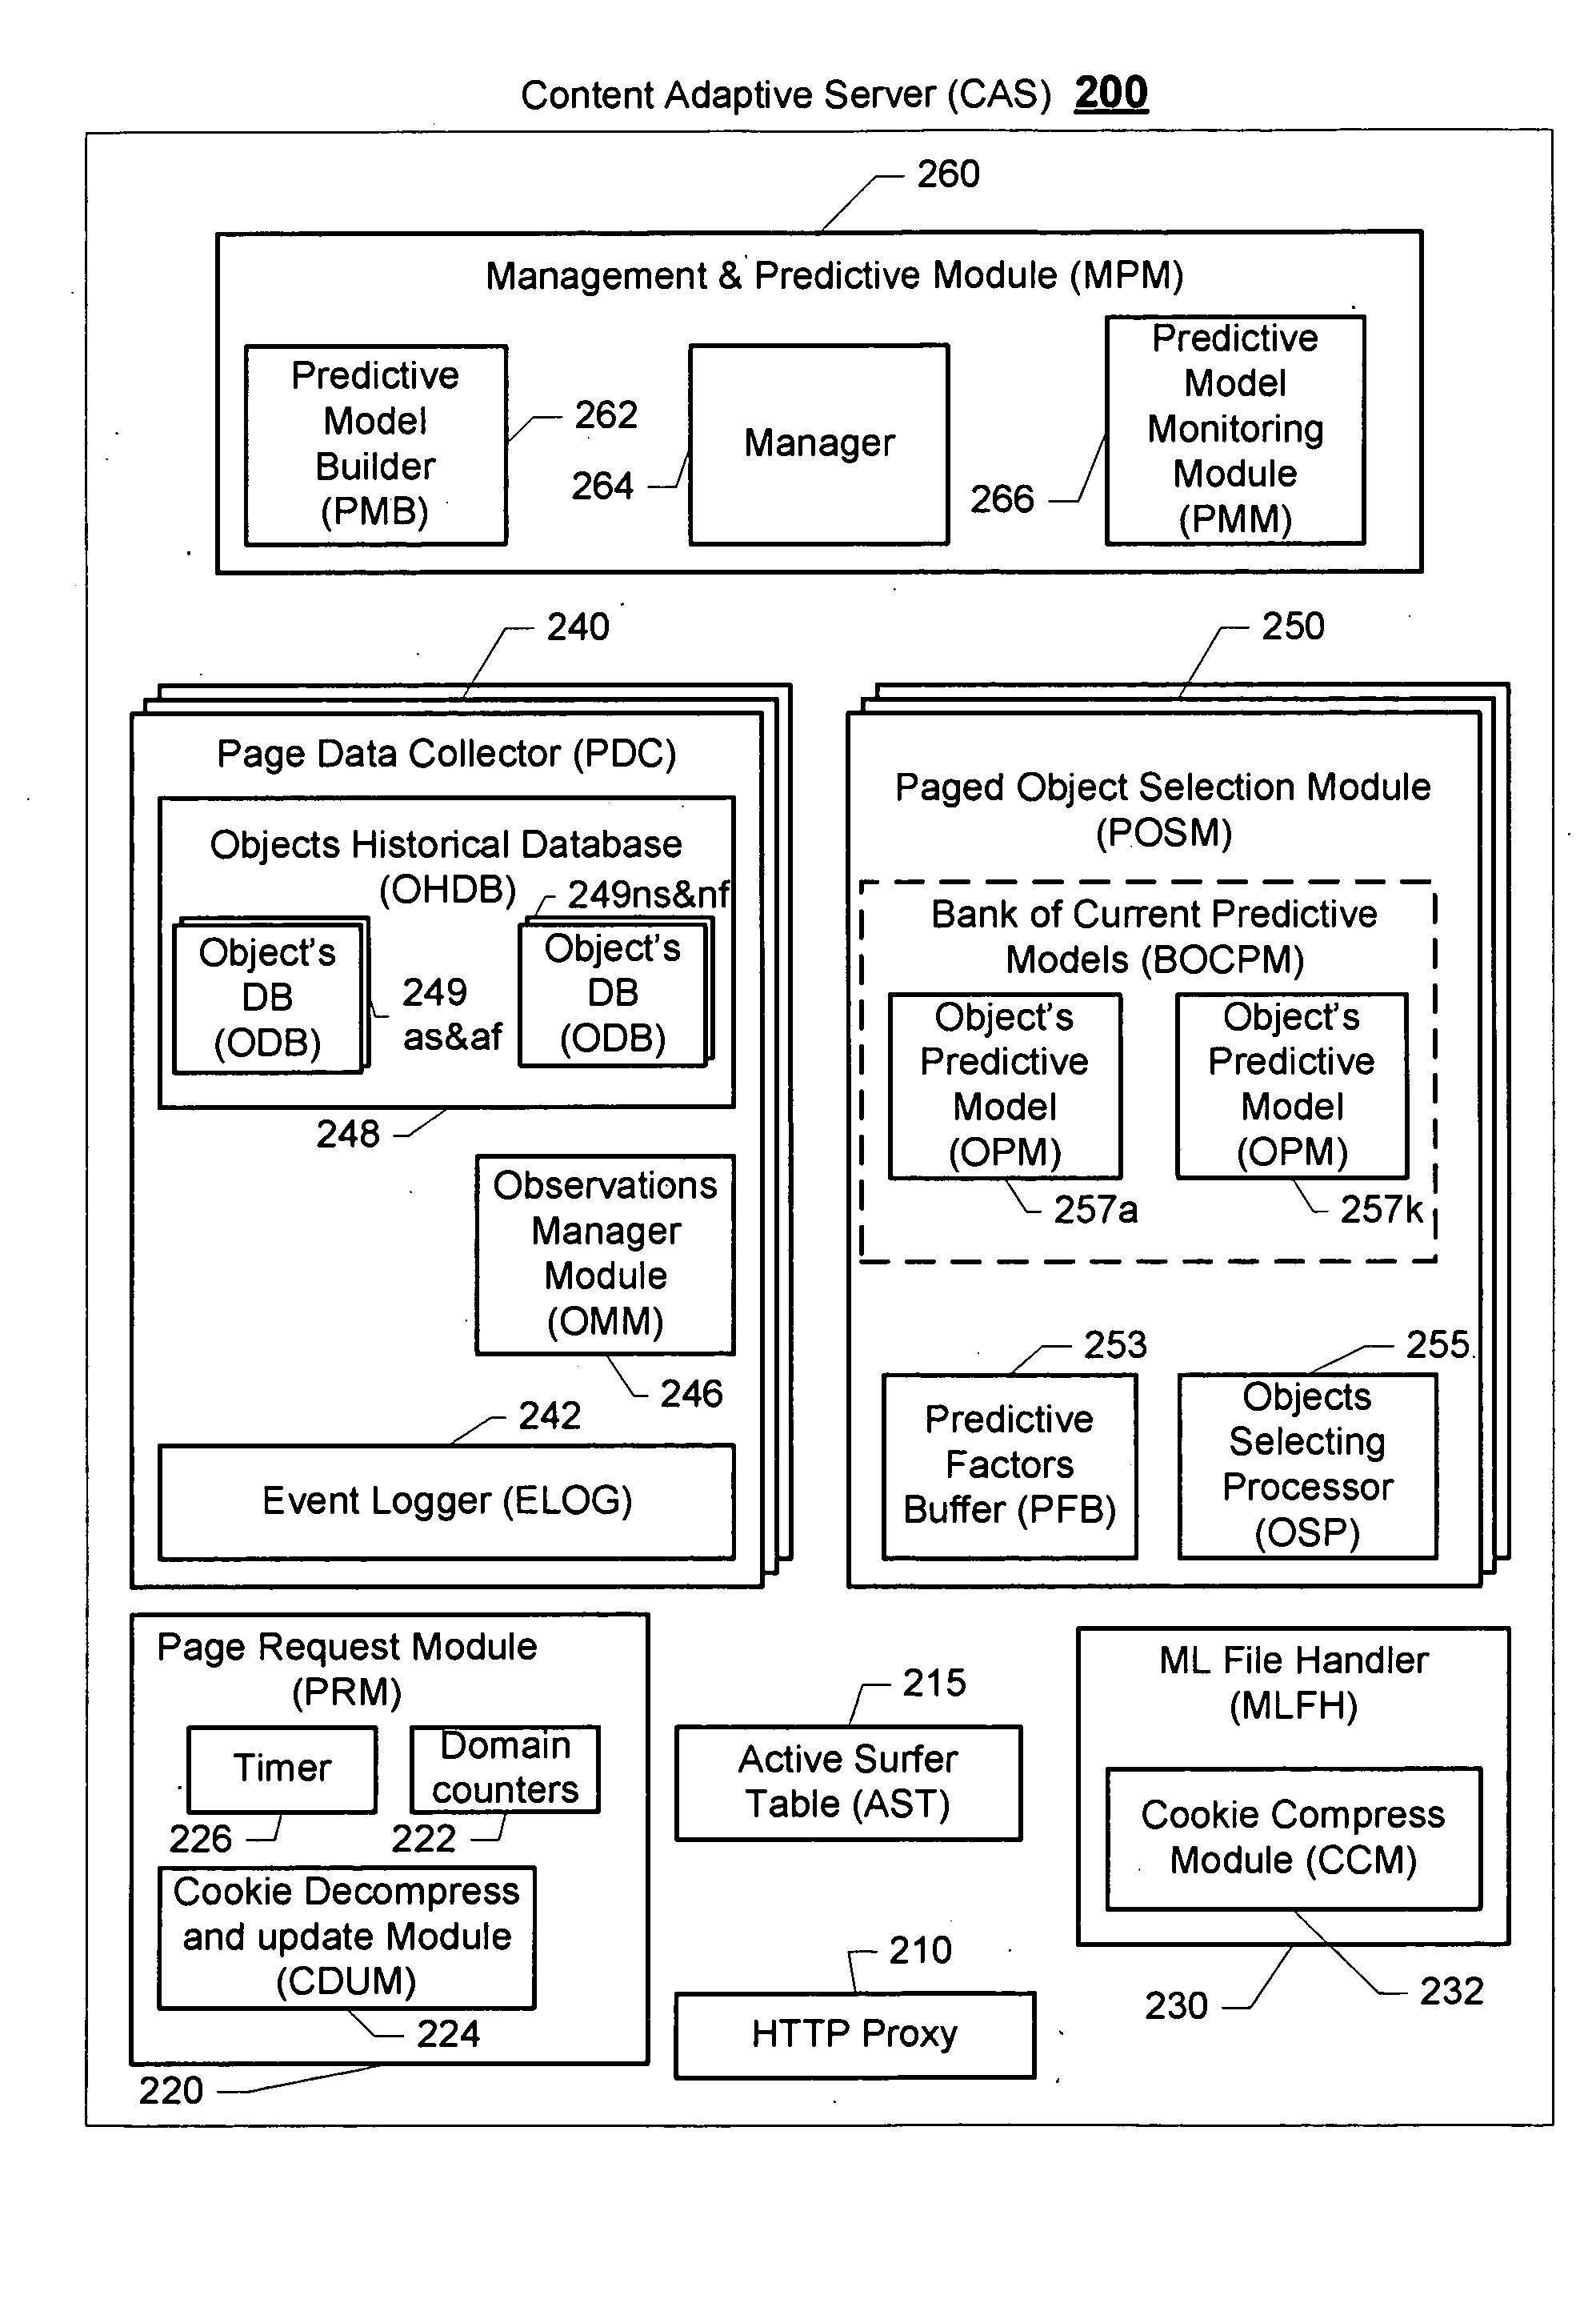 Method and system for providing targeted content to a surfer